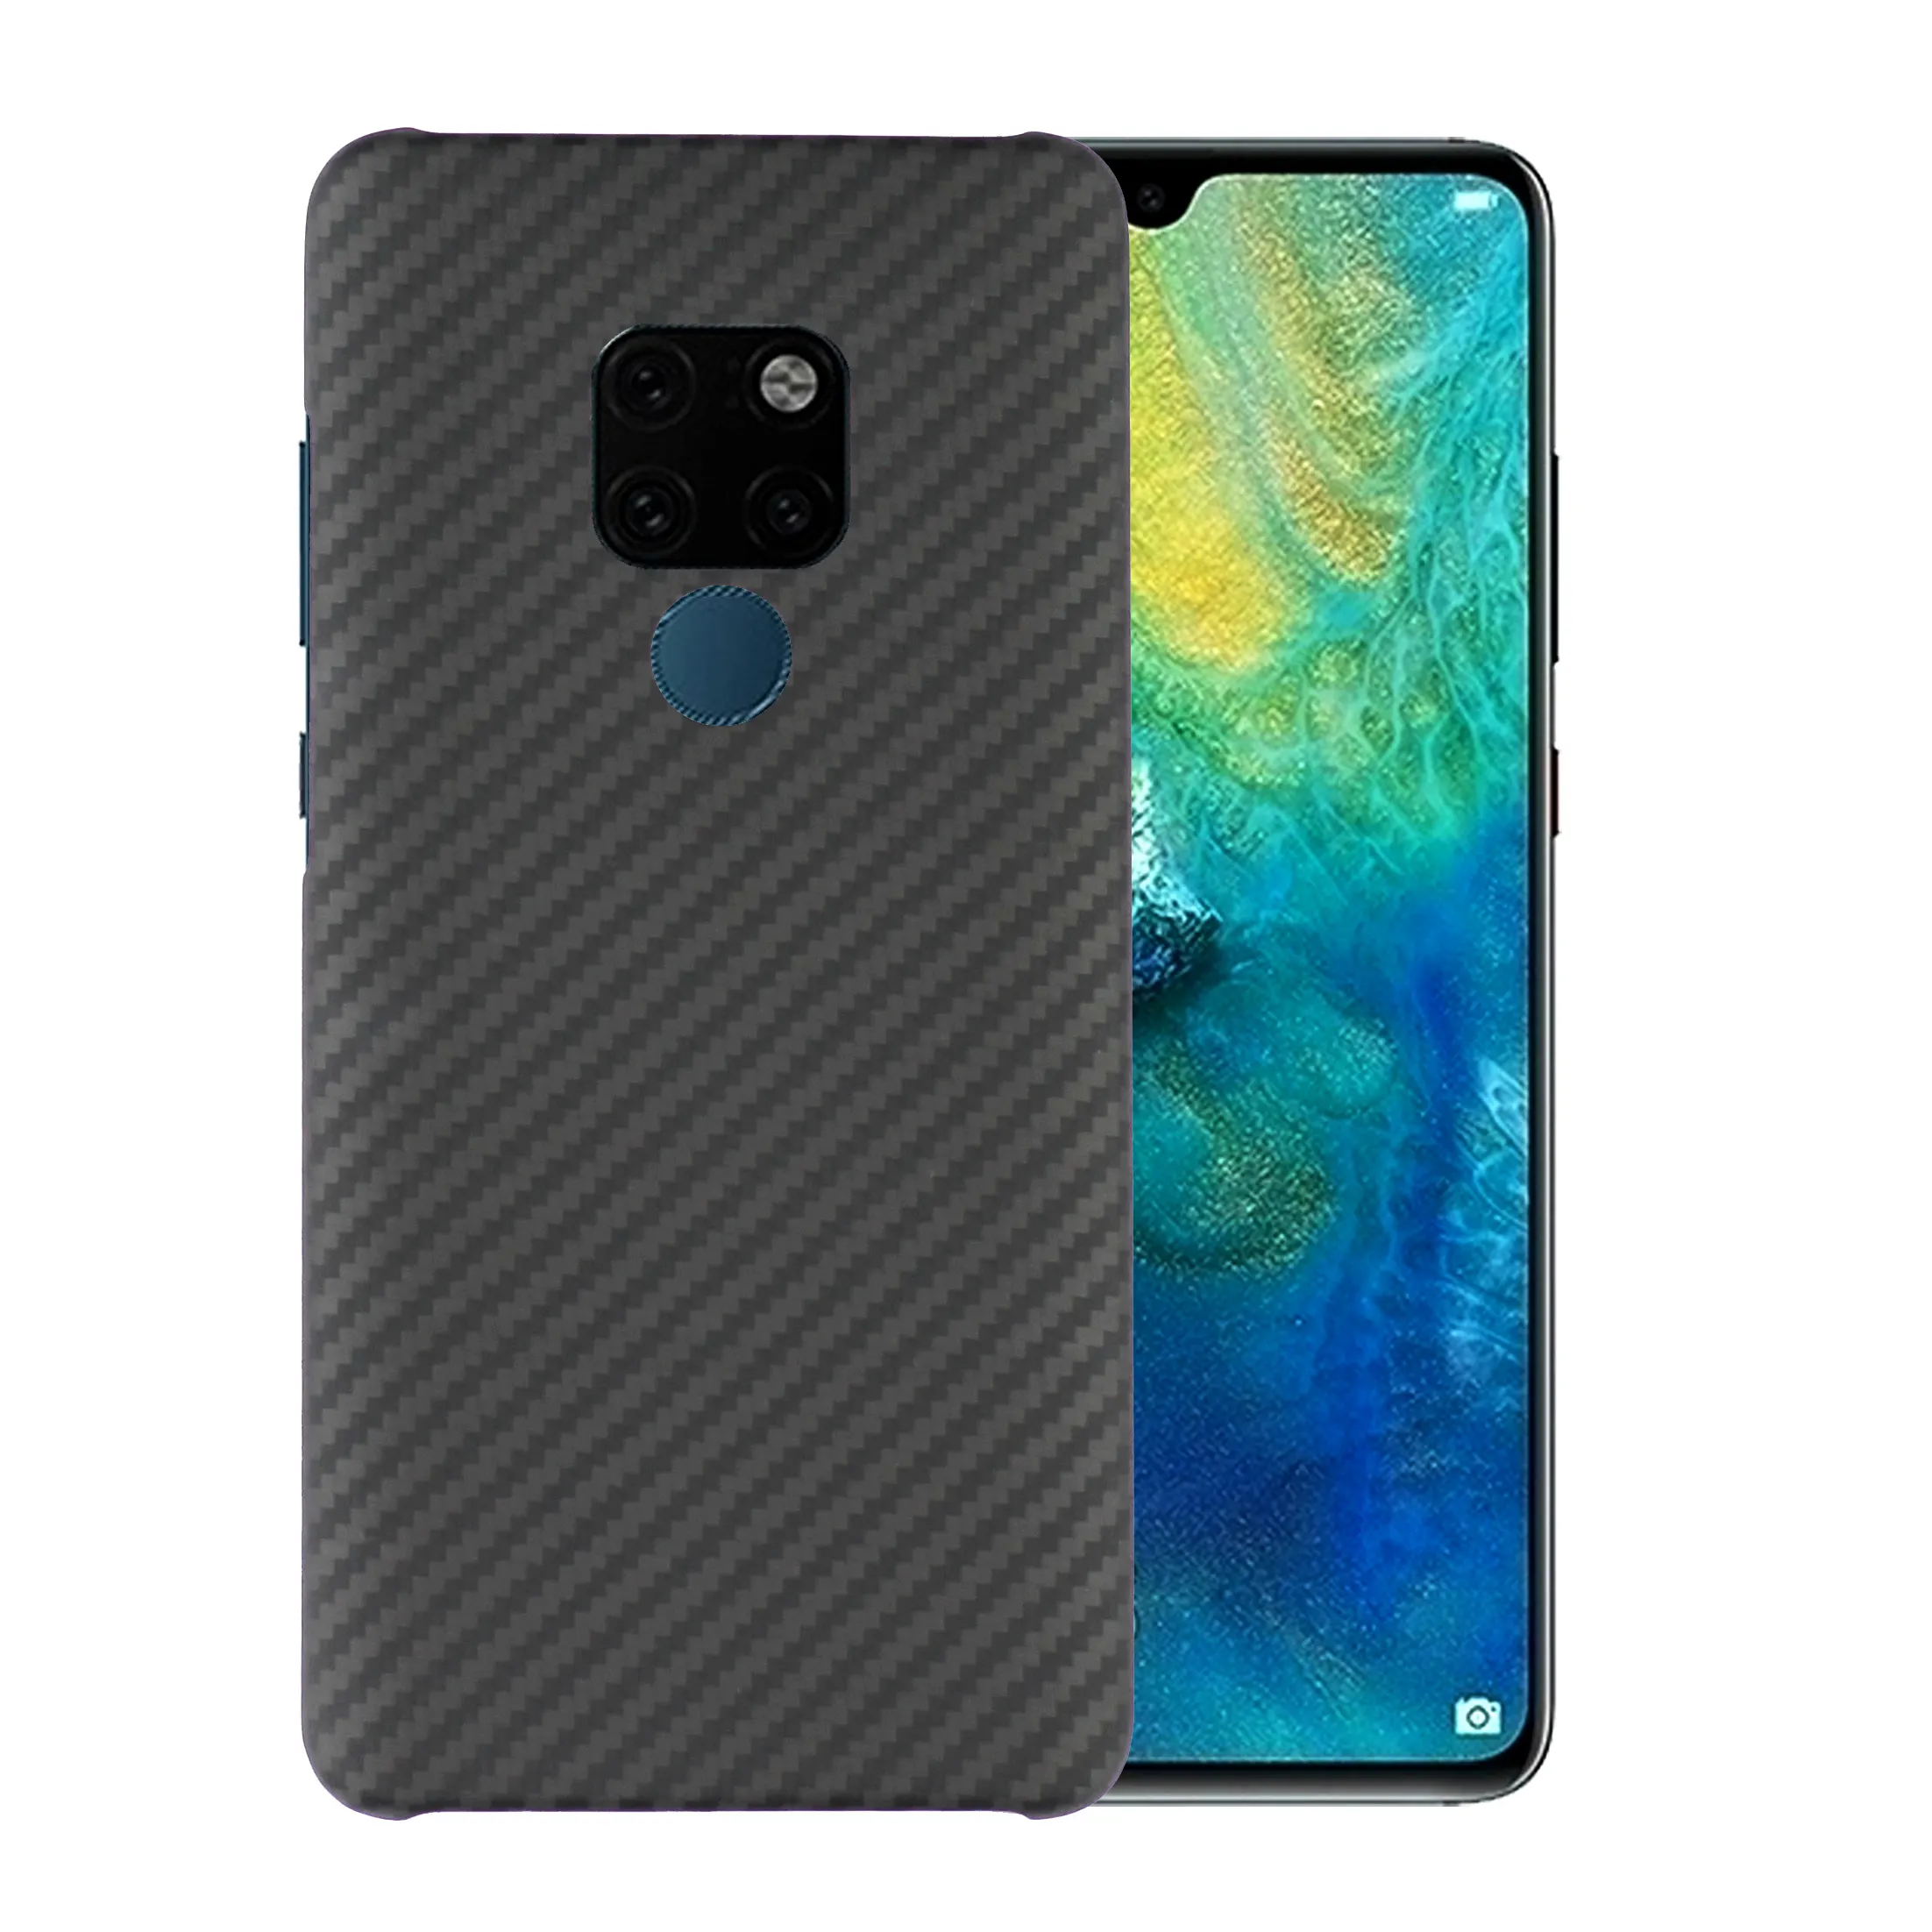 Real Aramid Fiber Case Mobile Phone Cover for Huawei Mate 20/20pro